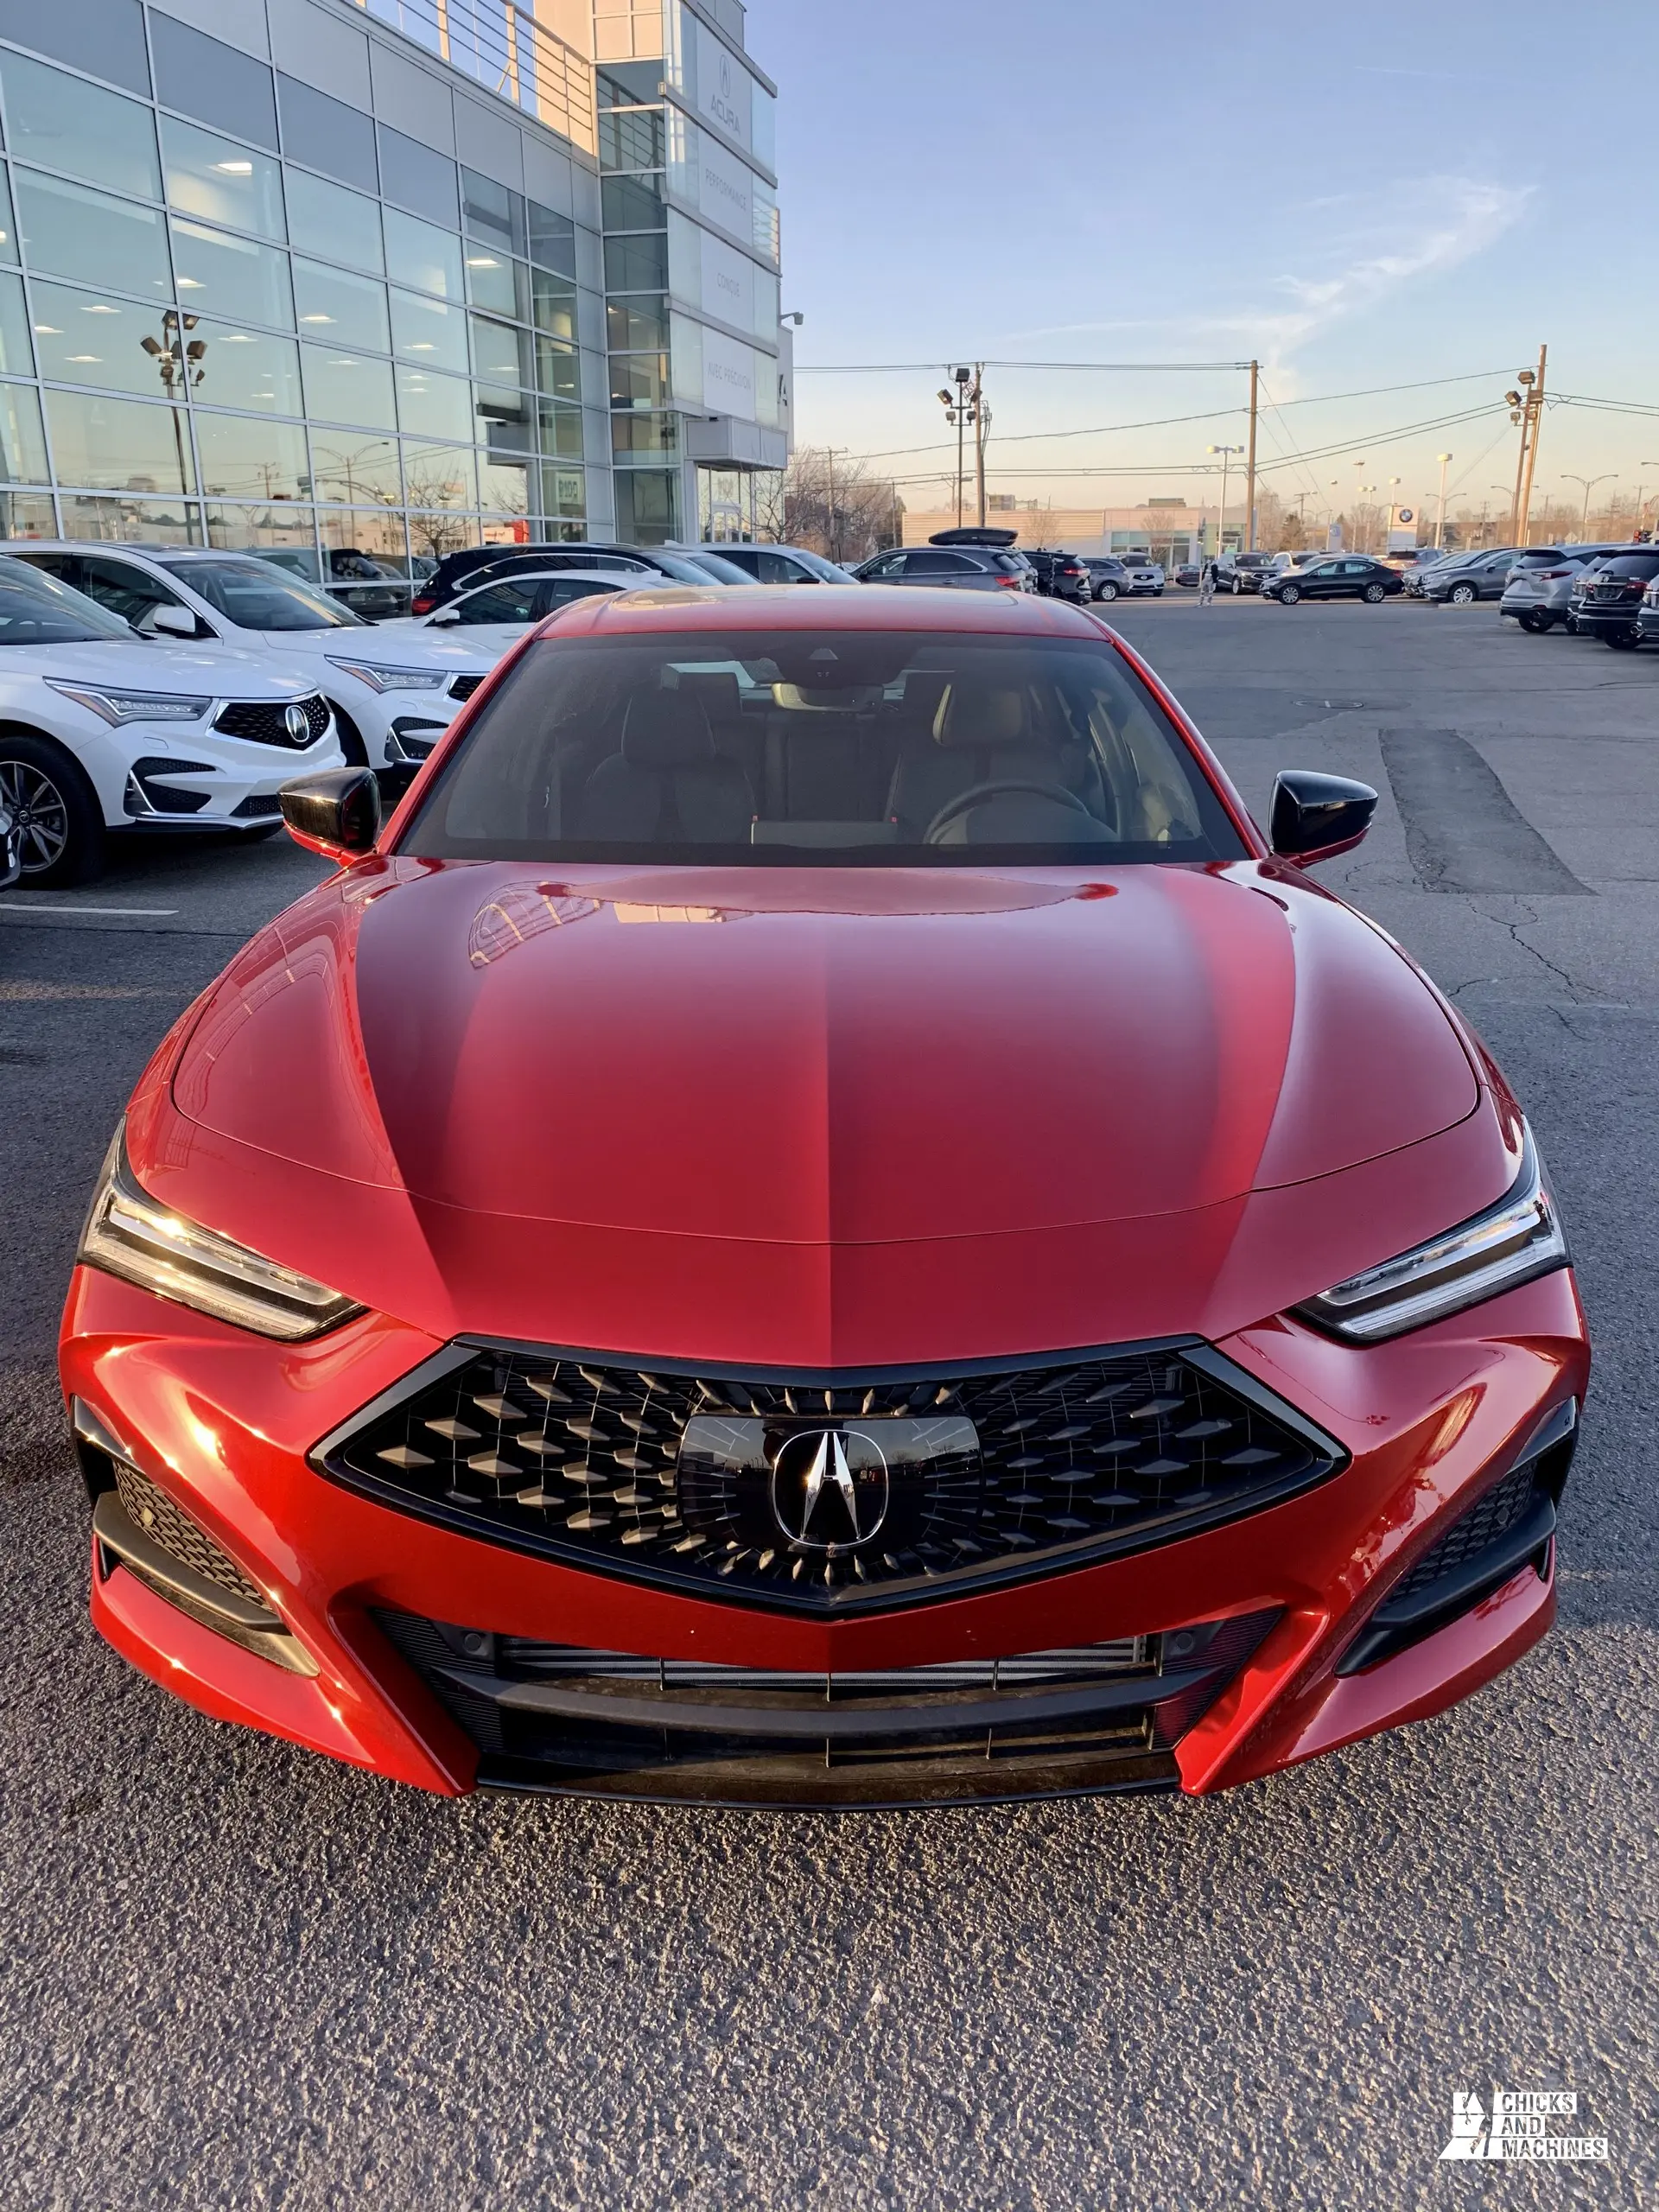 Road Test: 2021 Acura TLX A-Spec